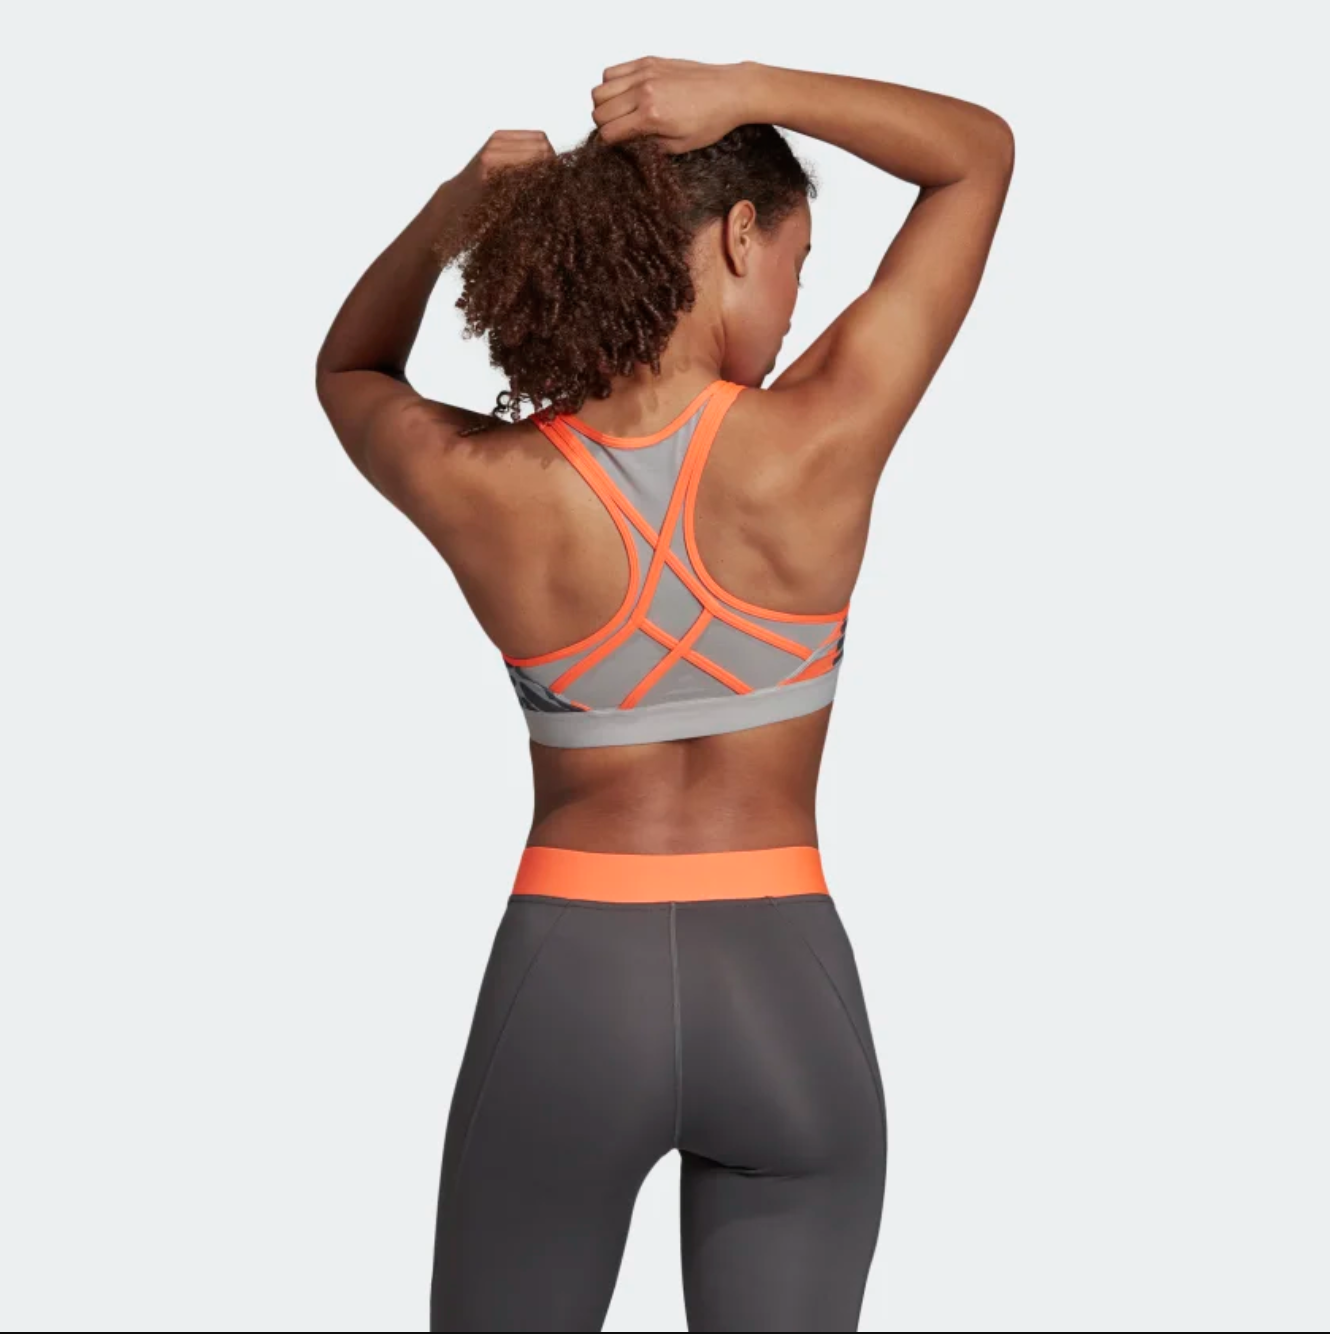 Need Some Workout Inspo? Shop This Cute Activewear And Turn Heads